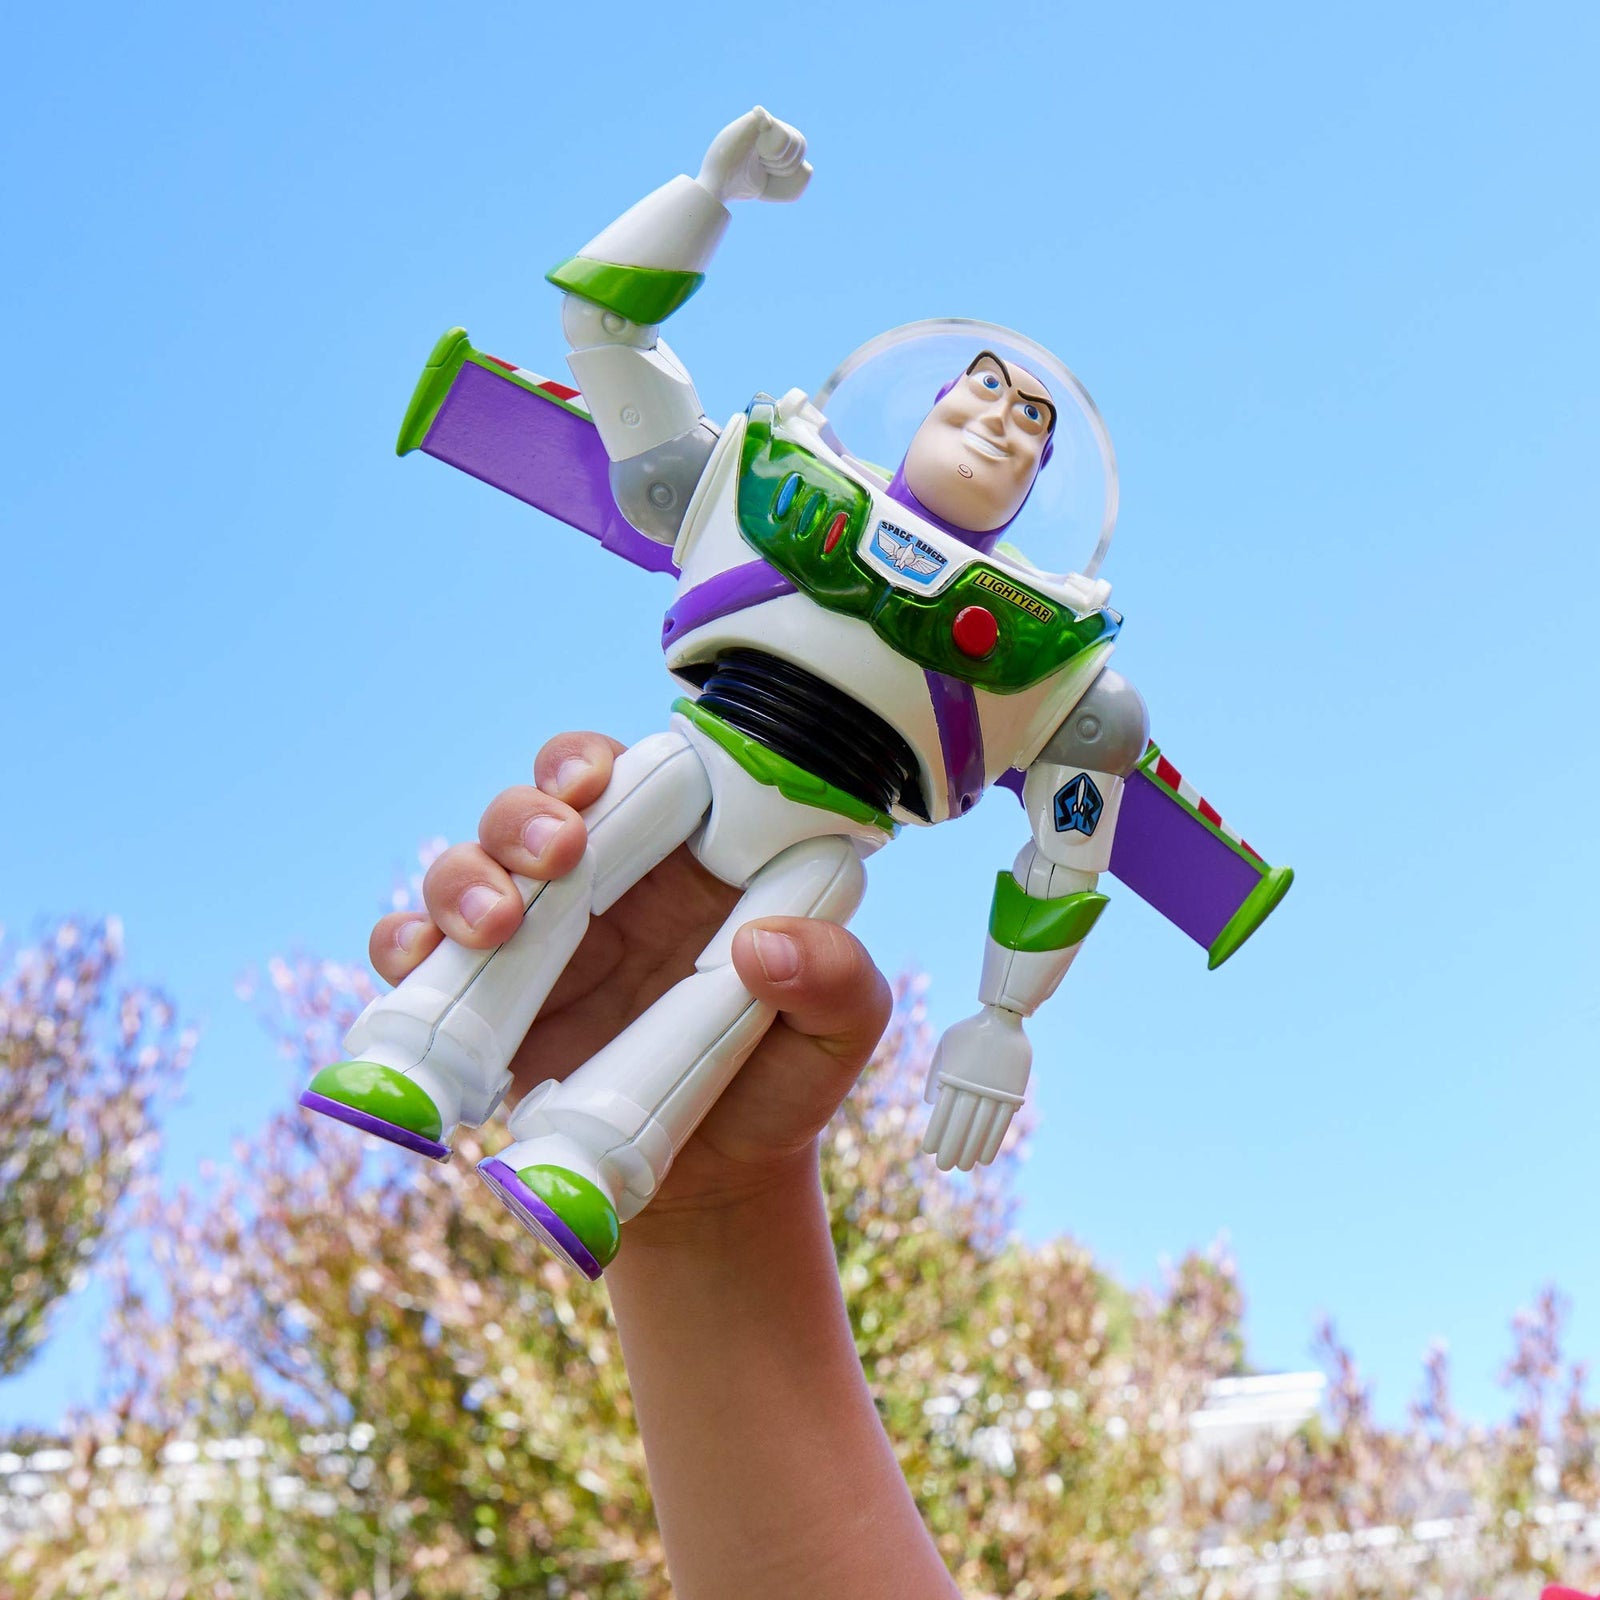 Disney Pixar Toy Story 4 Blast-Off Buzz Lightyear Figure, 7 in / 17.78 cm-Tall, with Lights, Phrases, Sounds and Pop-Out Wings, Gift for Kids 3 Years and Older [Amazon Exclusive]